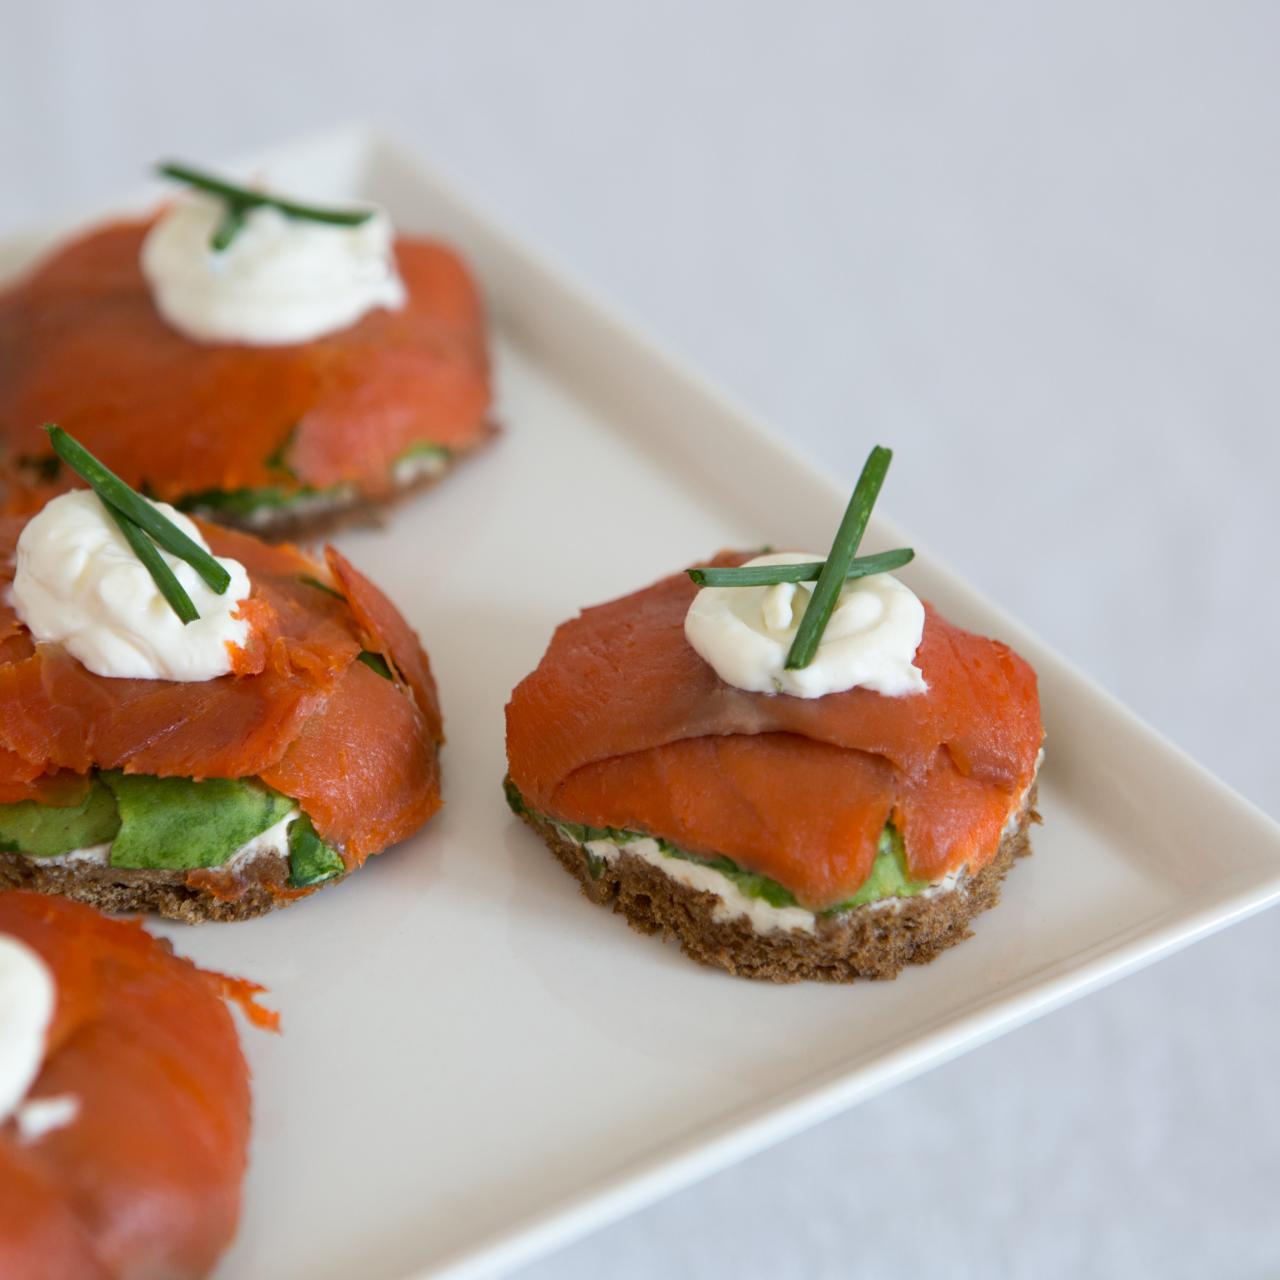 https://food.fnr.sndimg.com/content/dam/images/food/fullset/2013/5/16/0/GH0513H_open-face-smoked-salmon-finger-sandwiches-with-herbed-horseradish-cream-cheese-recipe_s4x3.jpg.rend.hgtvcom.1280.1280.suffix/1433674839239.jpeg